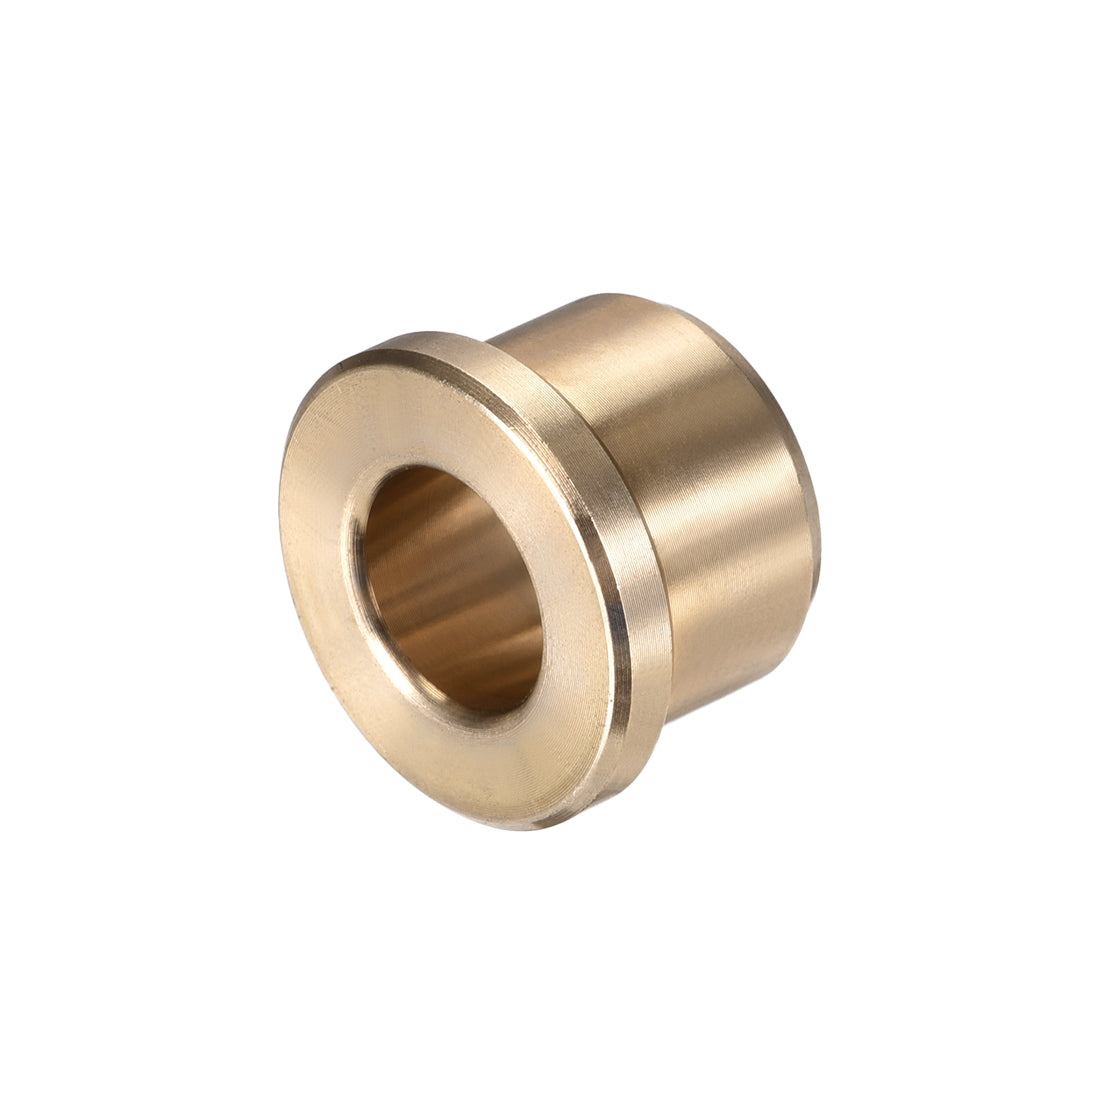 uxcell Uxcell Flange Bearing Sleeve, 3/8" x 5/8" x 1/2" Sintered Bronze Bushings